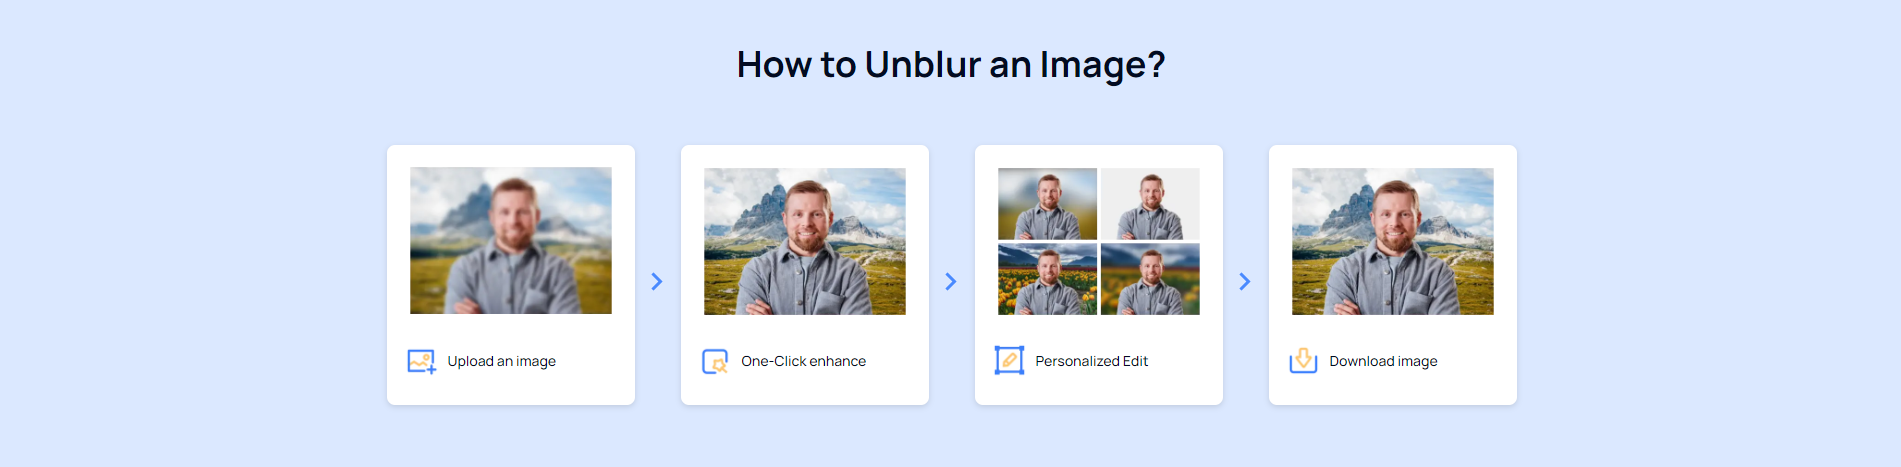 Stpes on how to unblur an image